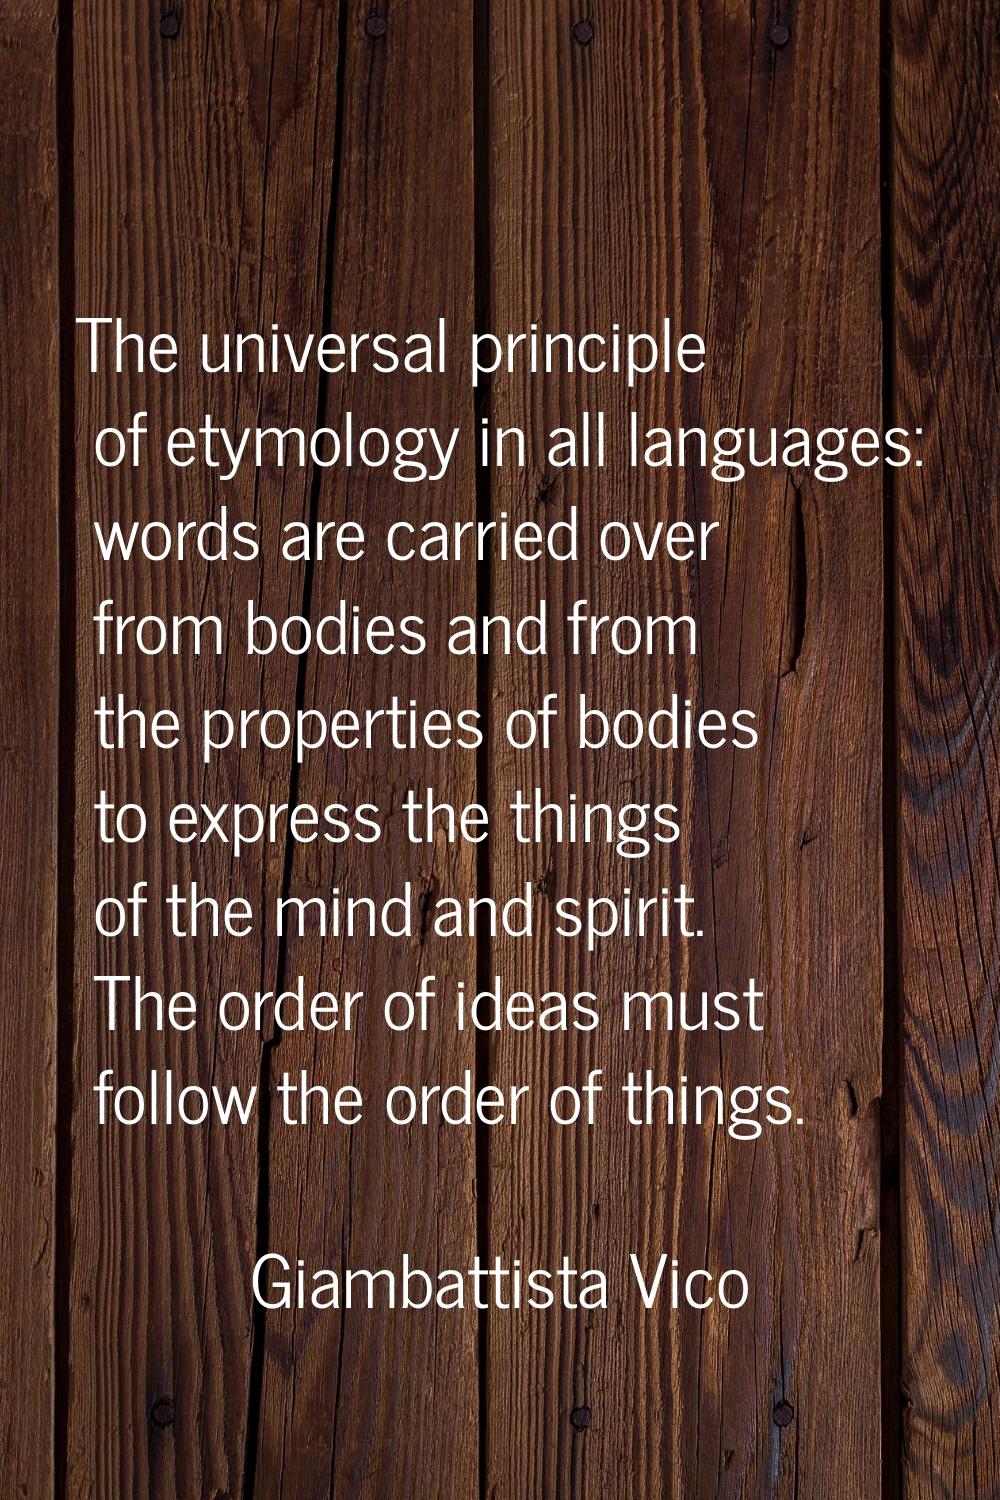 The universal principle of etymology in all languages: words are carried over from bodies and from 